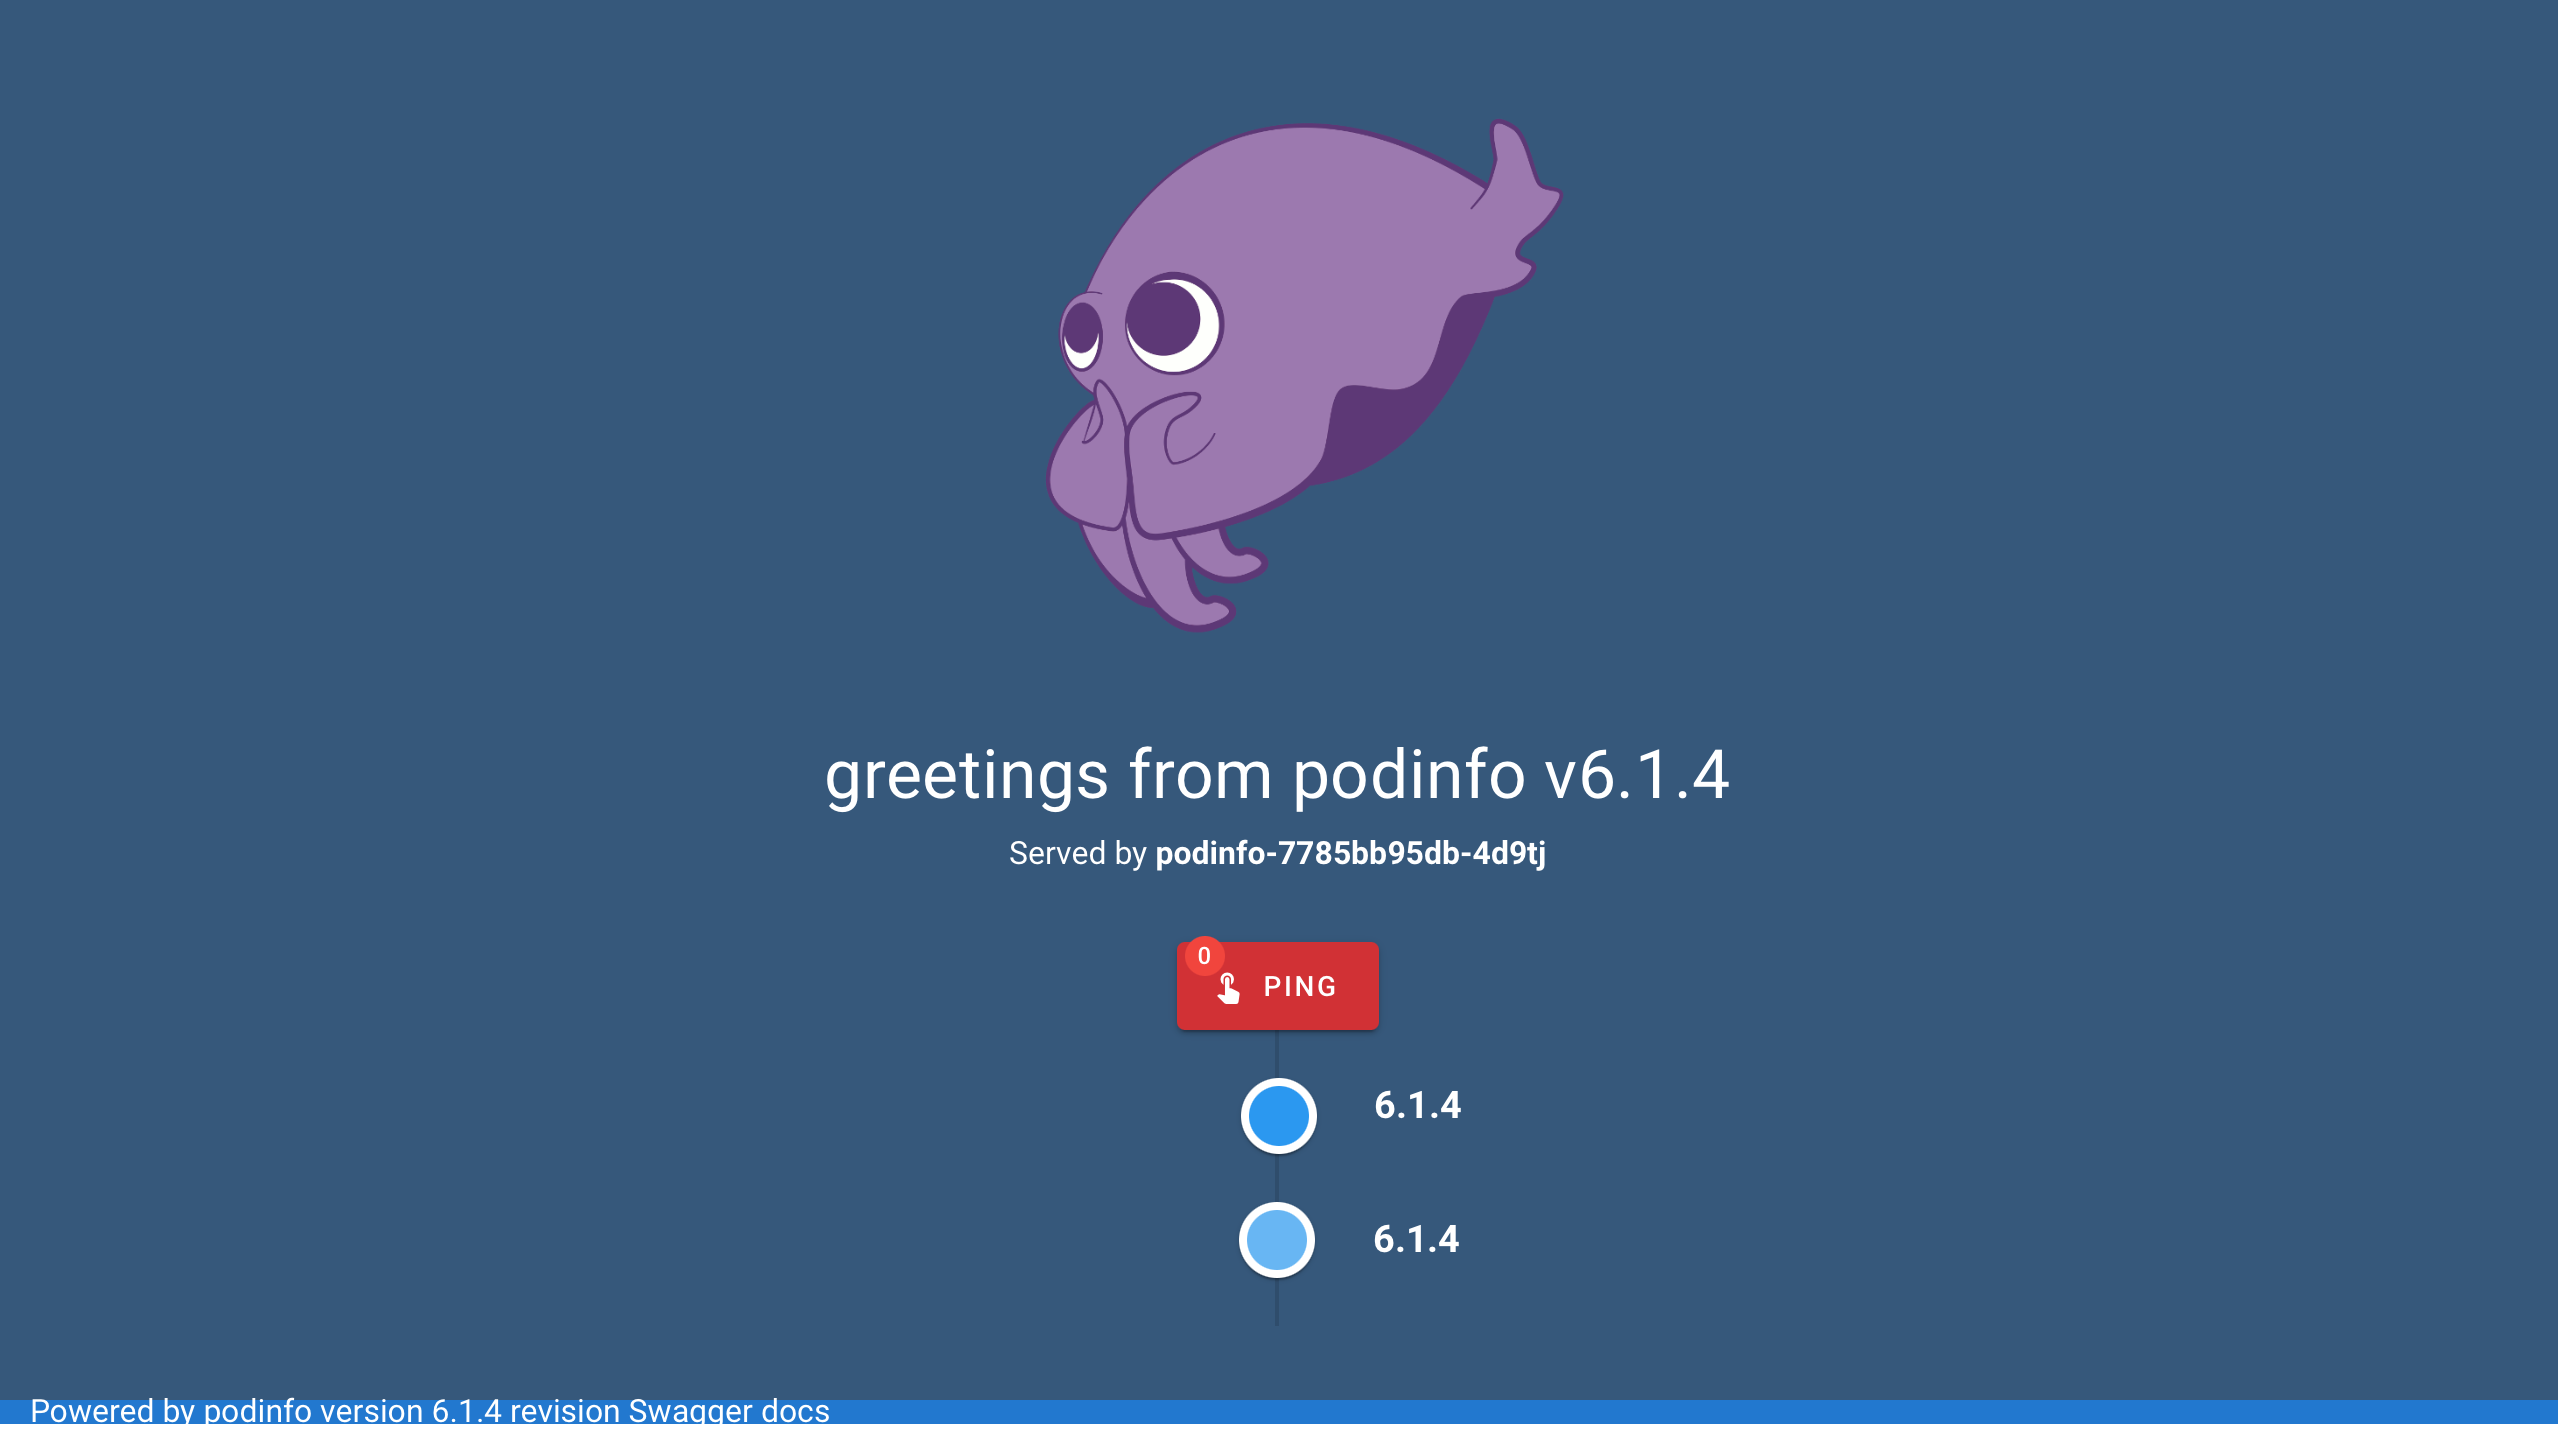 Accessing the Podinfo Web UI